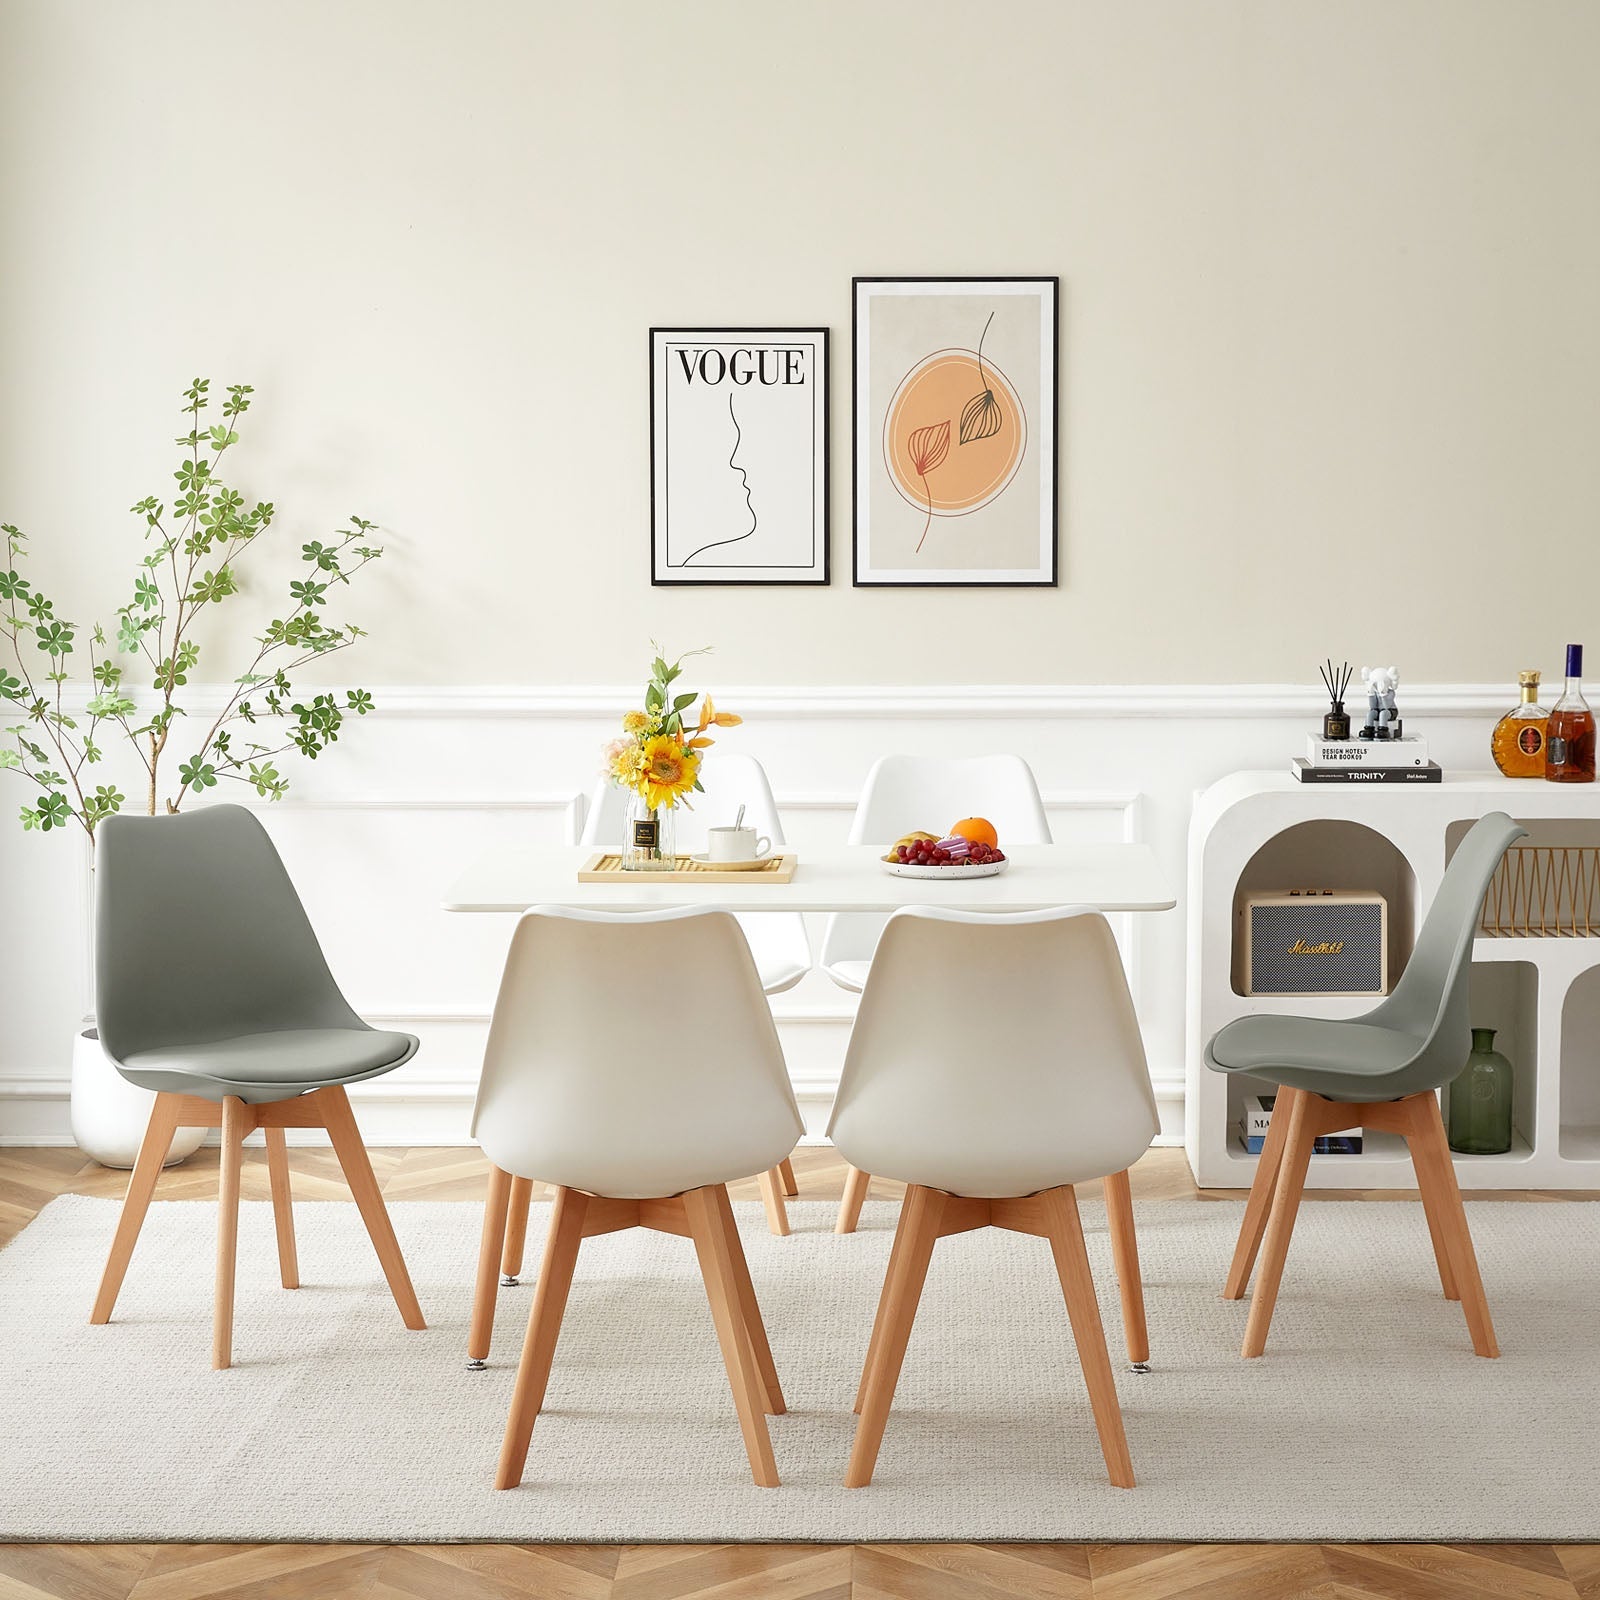 TULIP PP Dining Chairs with Beech Leg Scandinavian design Upholstered Chair - White and grey